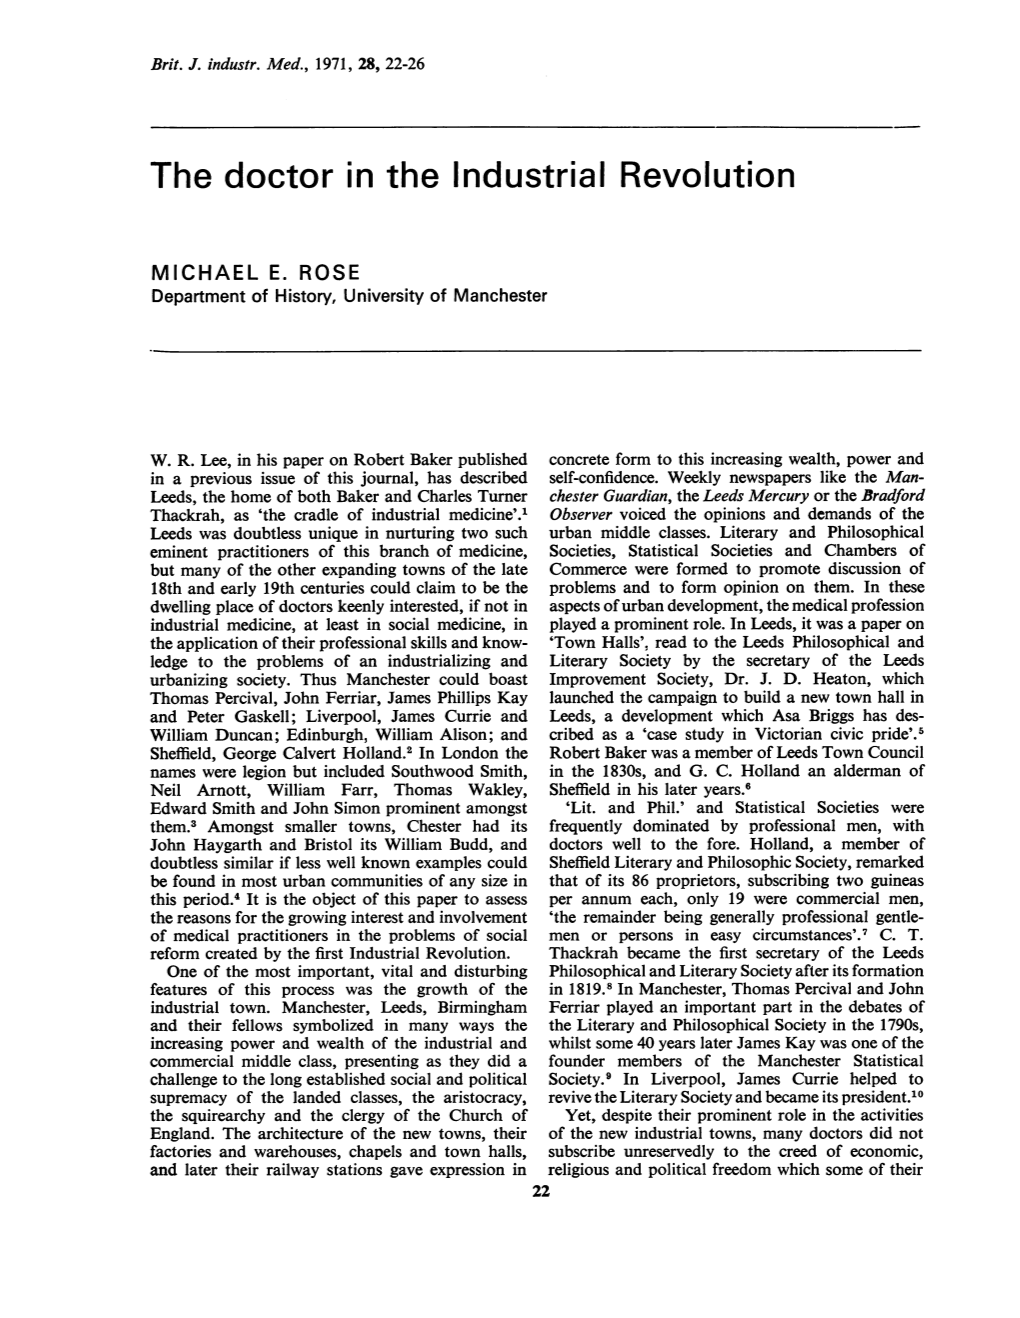 The Doctor in the Industrial Revolution